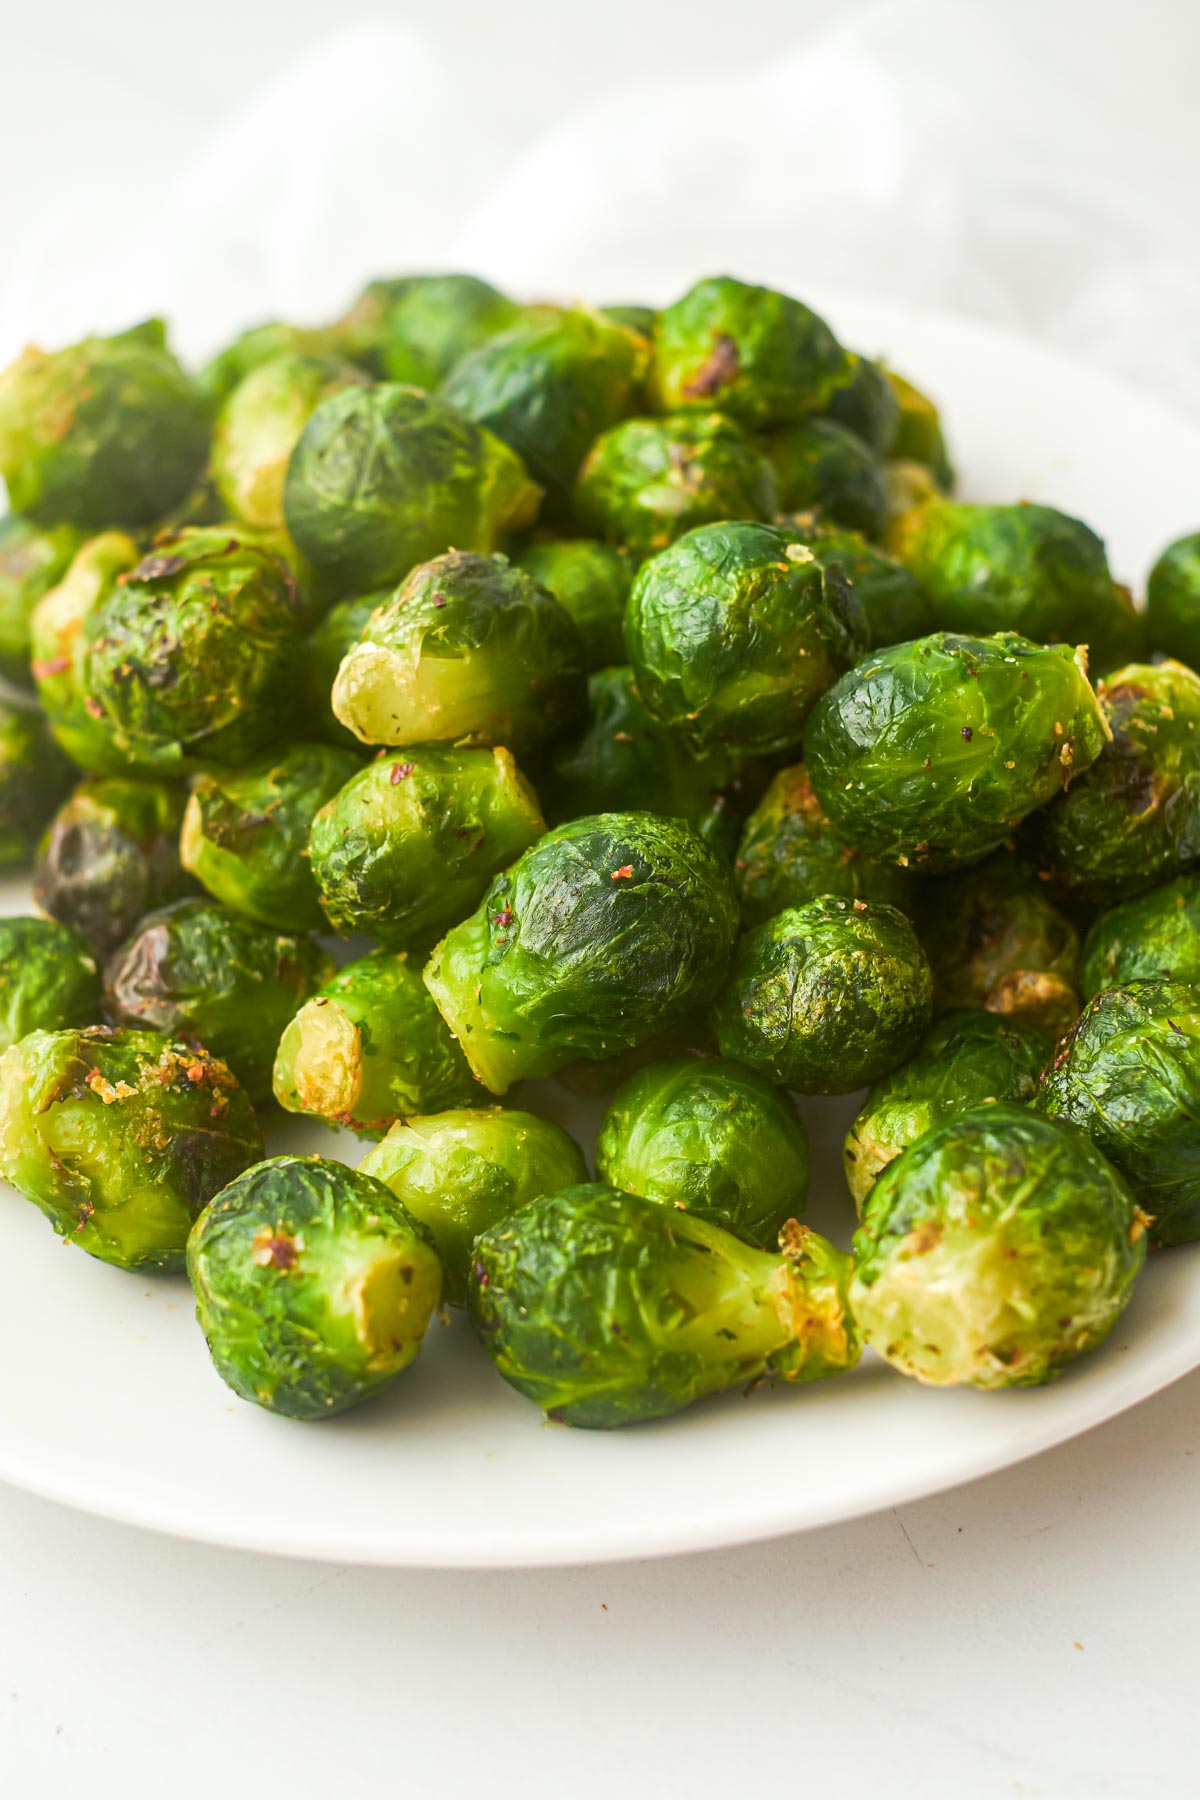 the cooked frozen brussel sprouts air fryer served on a white plate